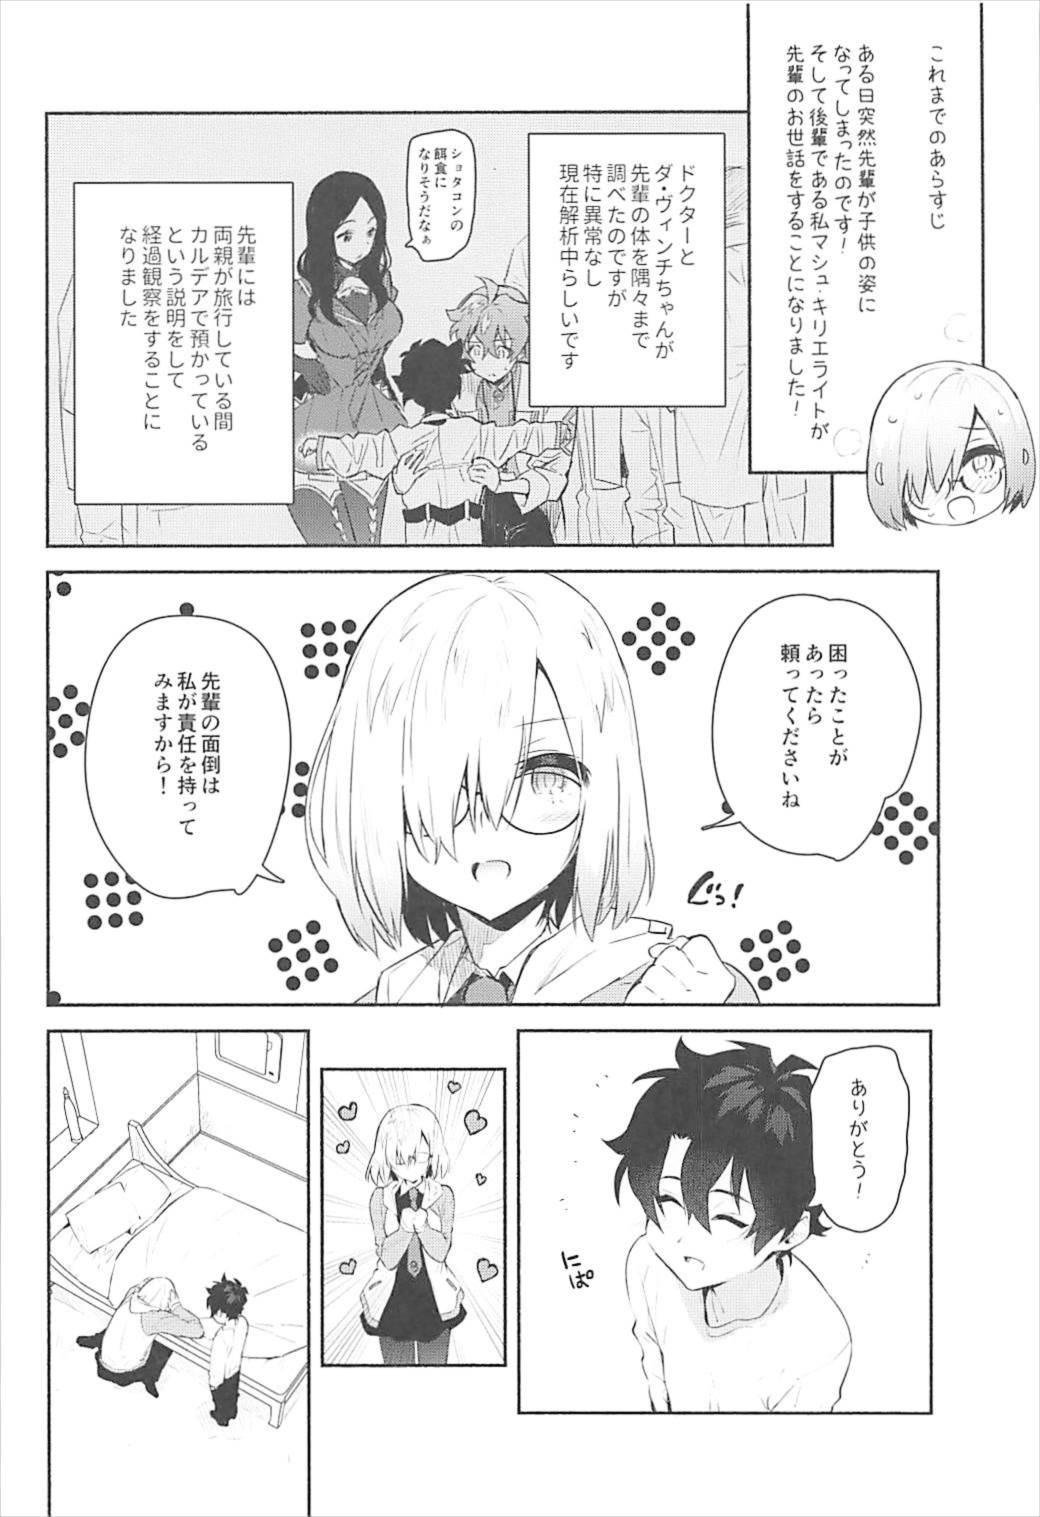 8teenxxx Mash to Issho - Fate grand order Ejaculations - Page 5